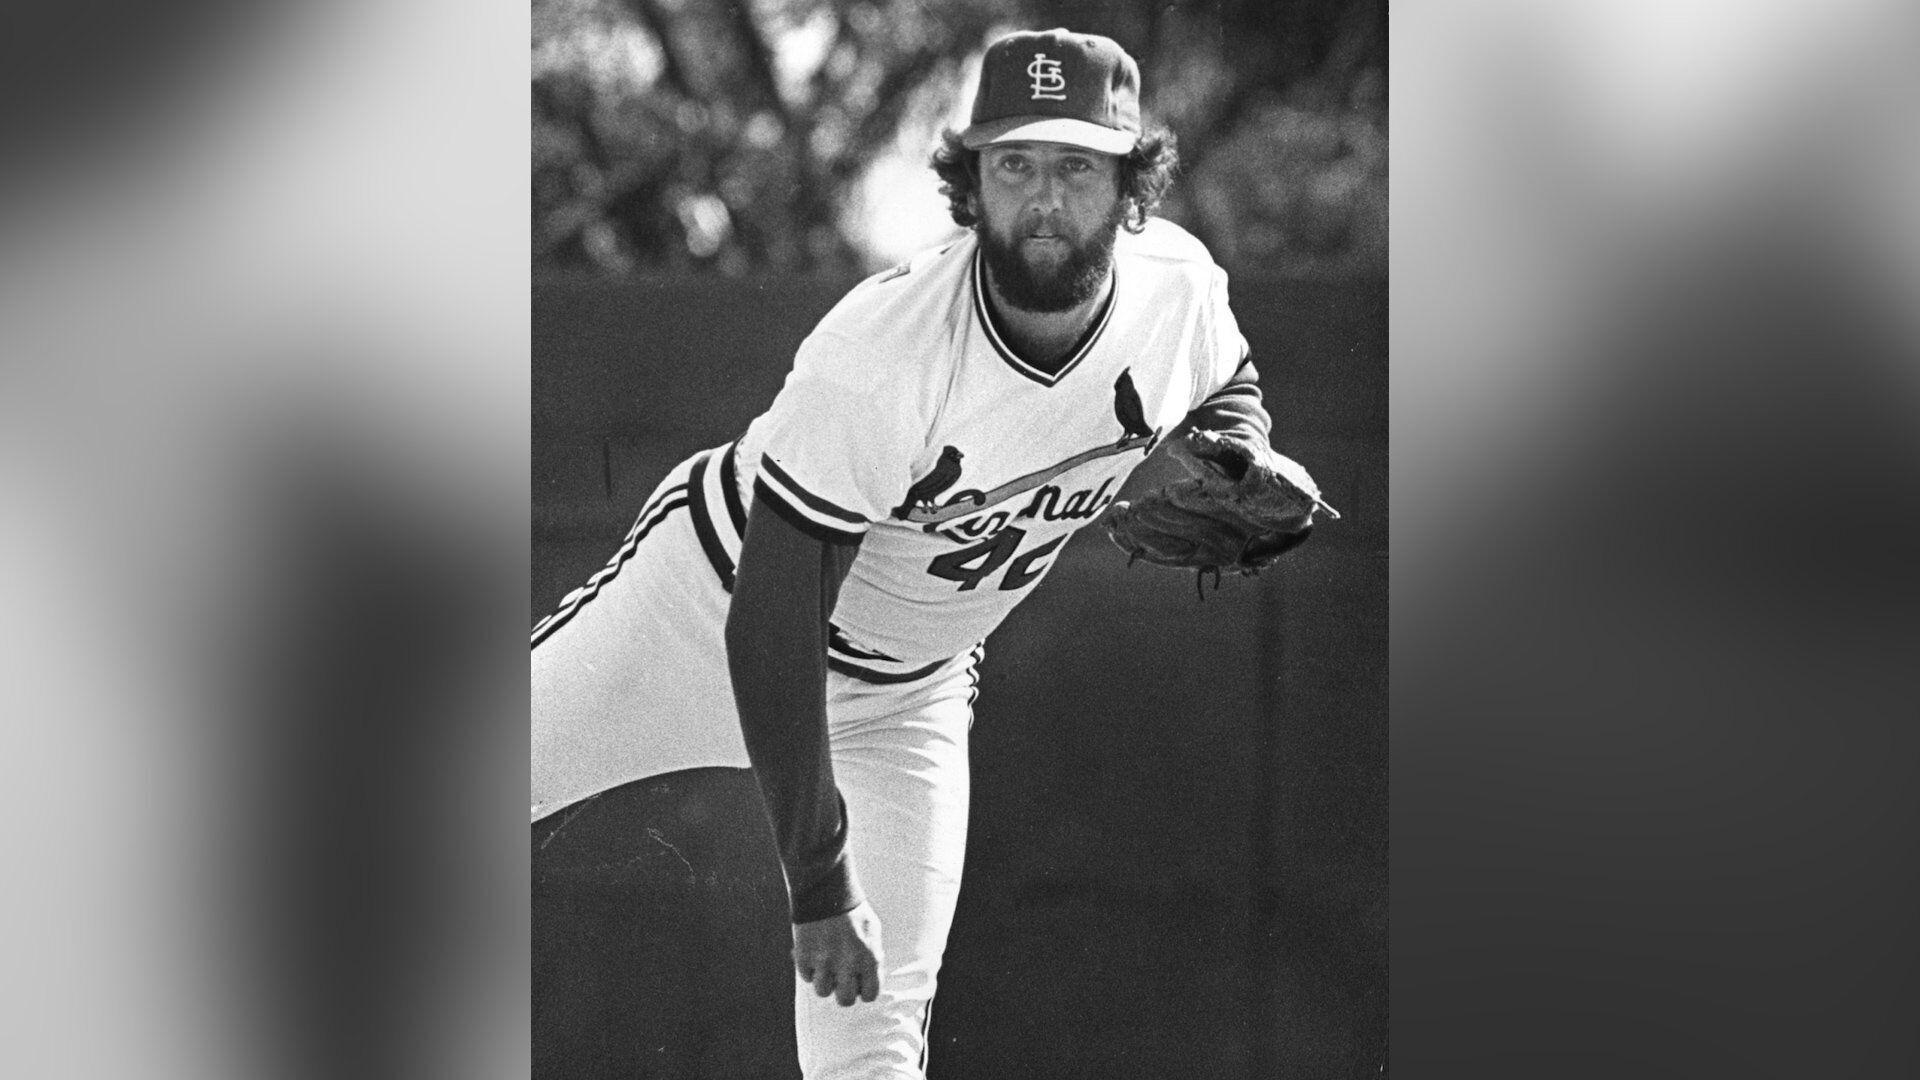 Cardinals relief ace Bruce Sutter, who clinched 1982 World Series